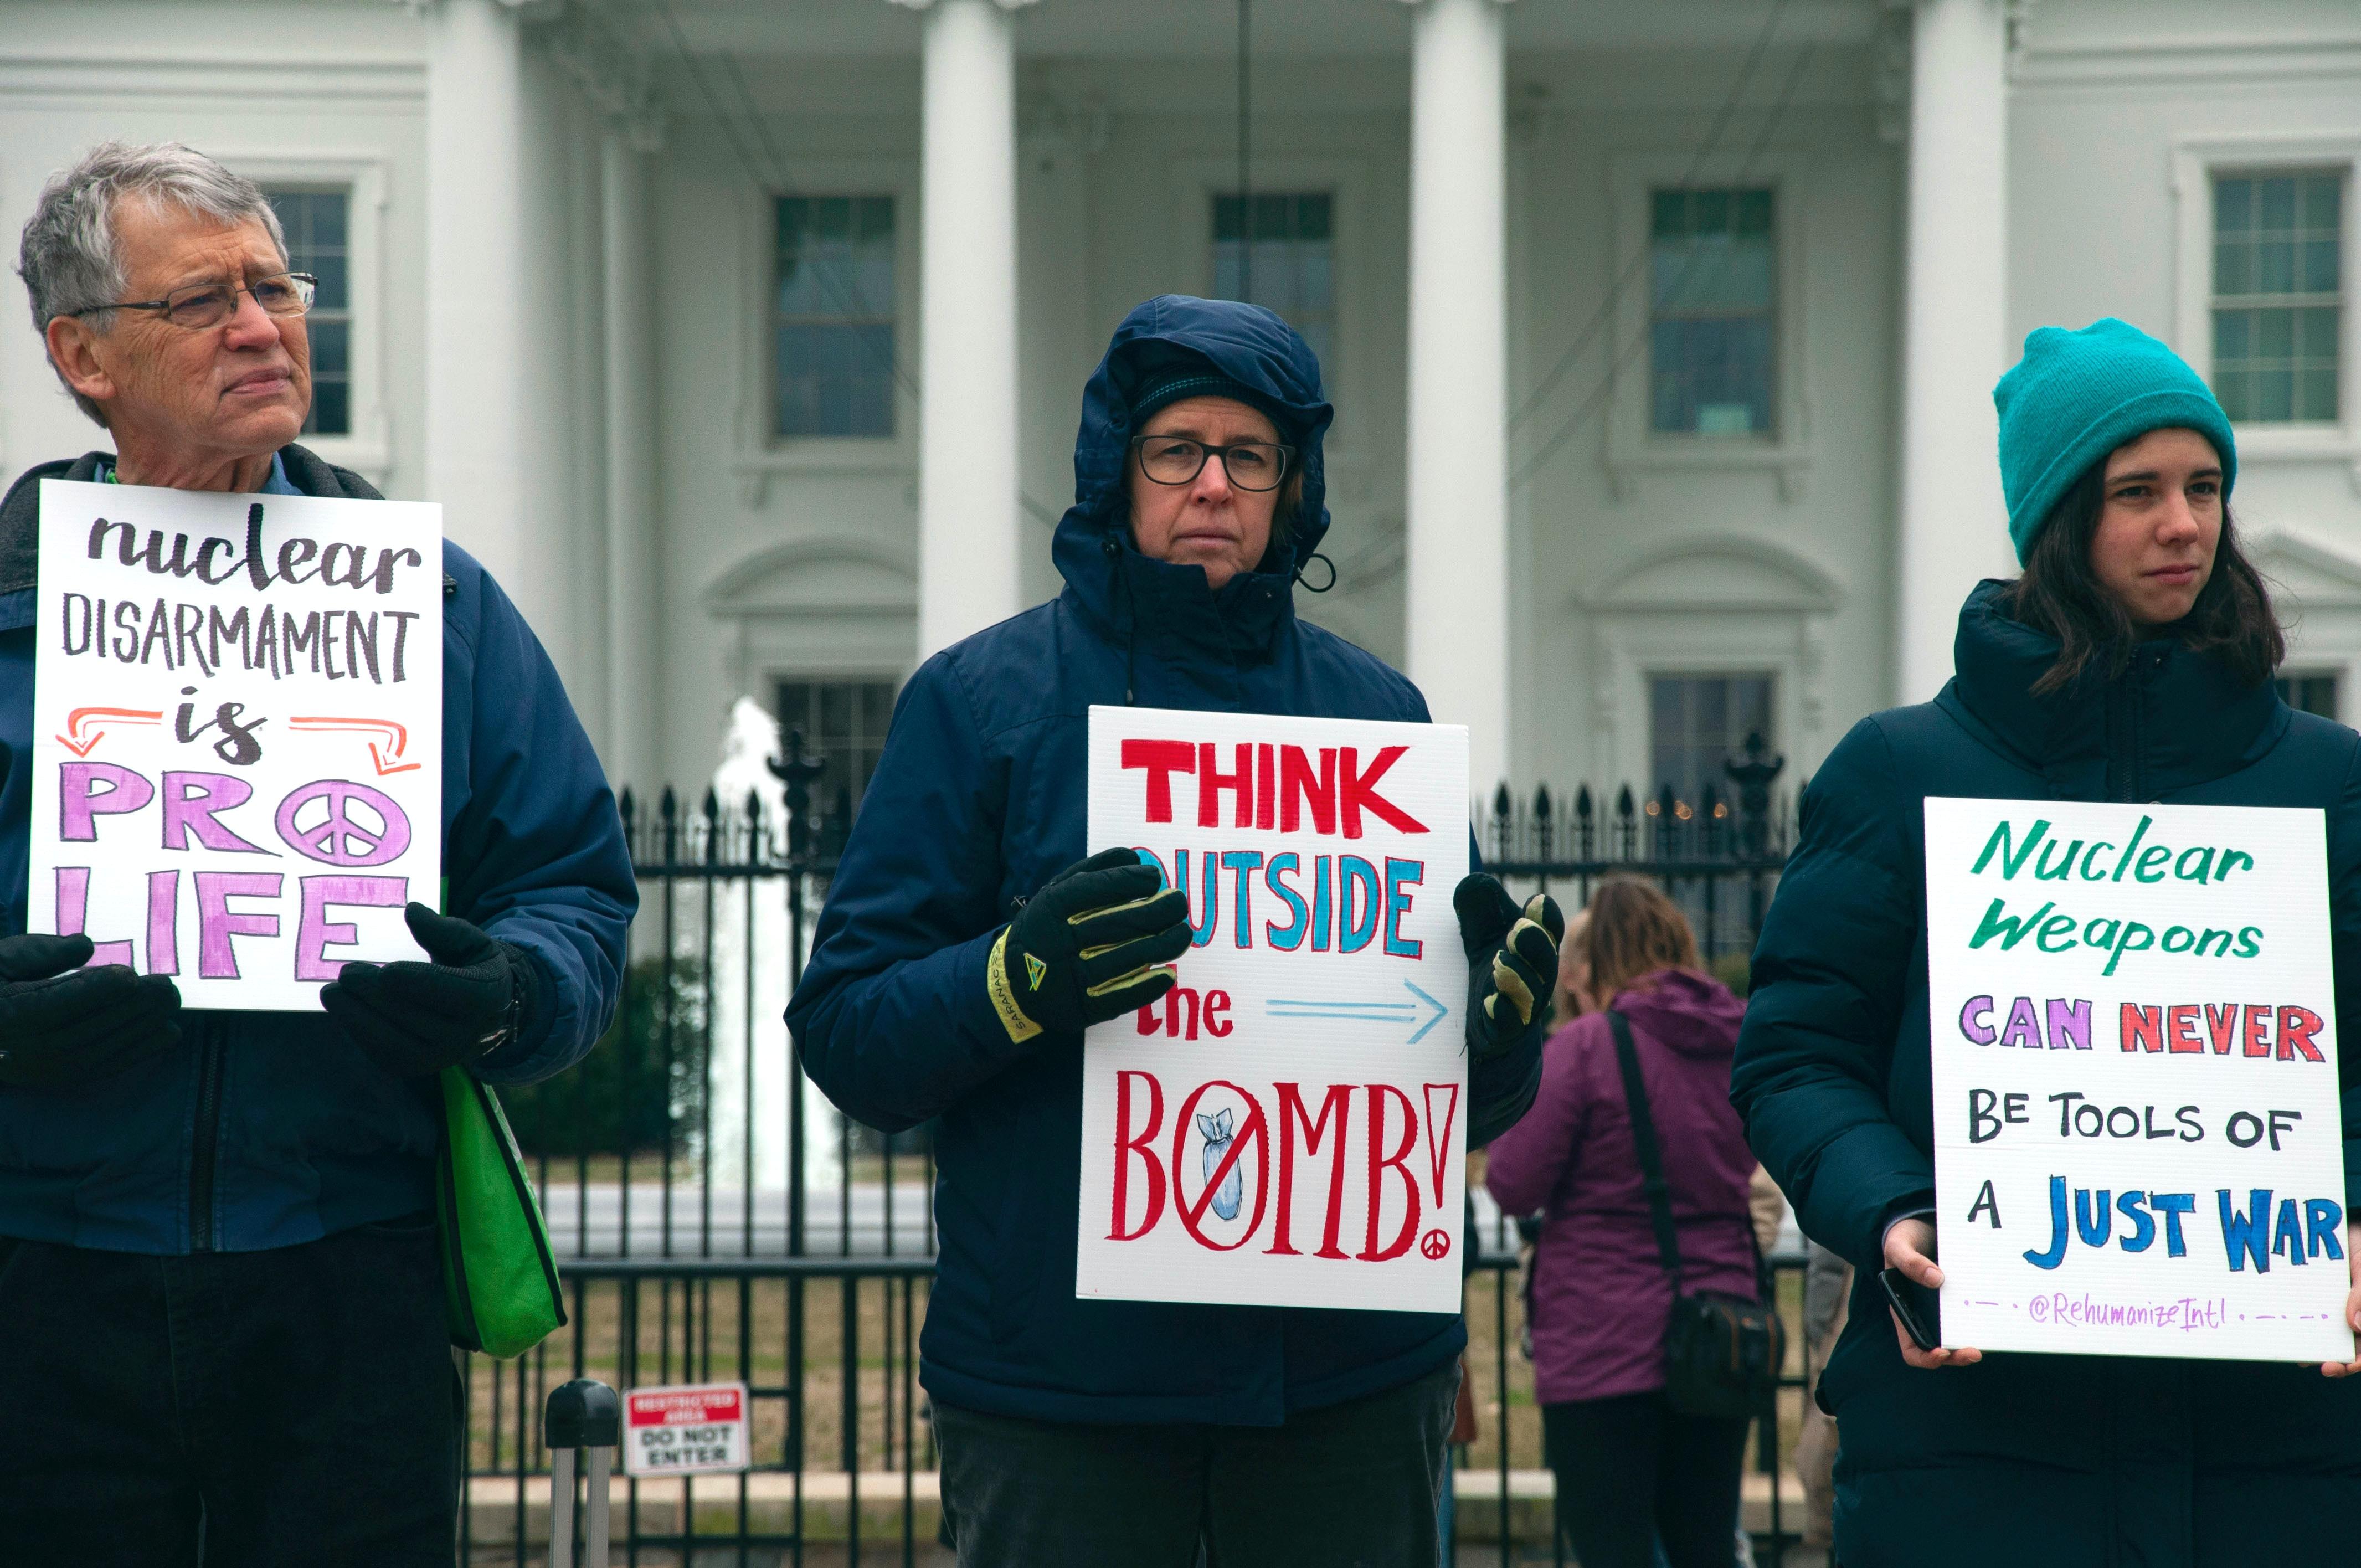 Man and two women protest nuclear weapons outside White House